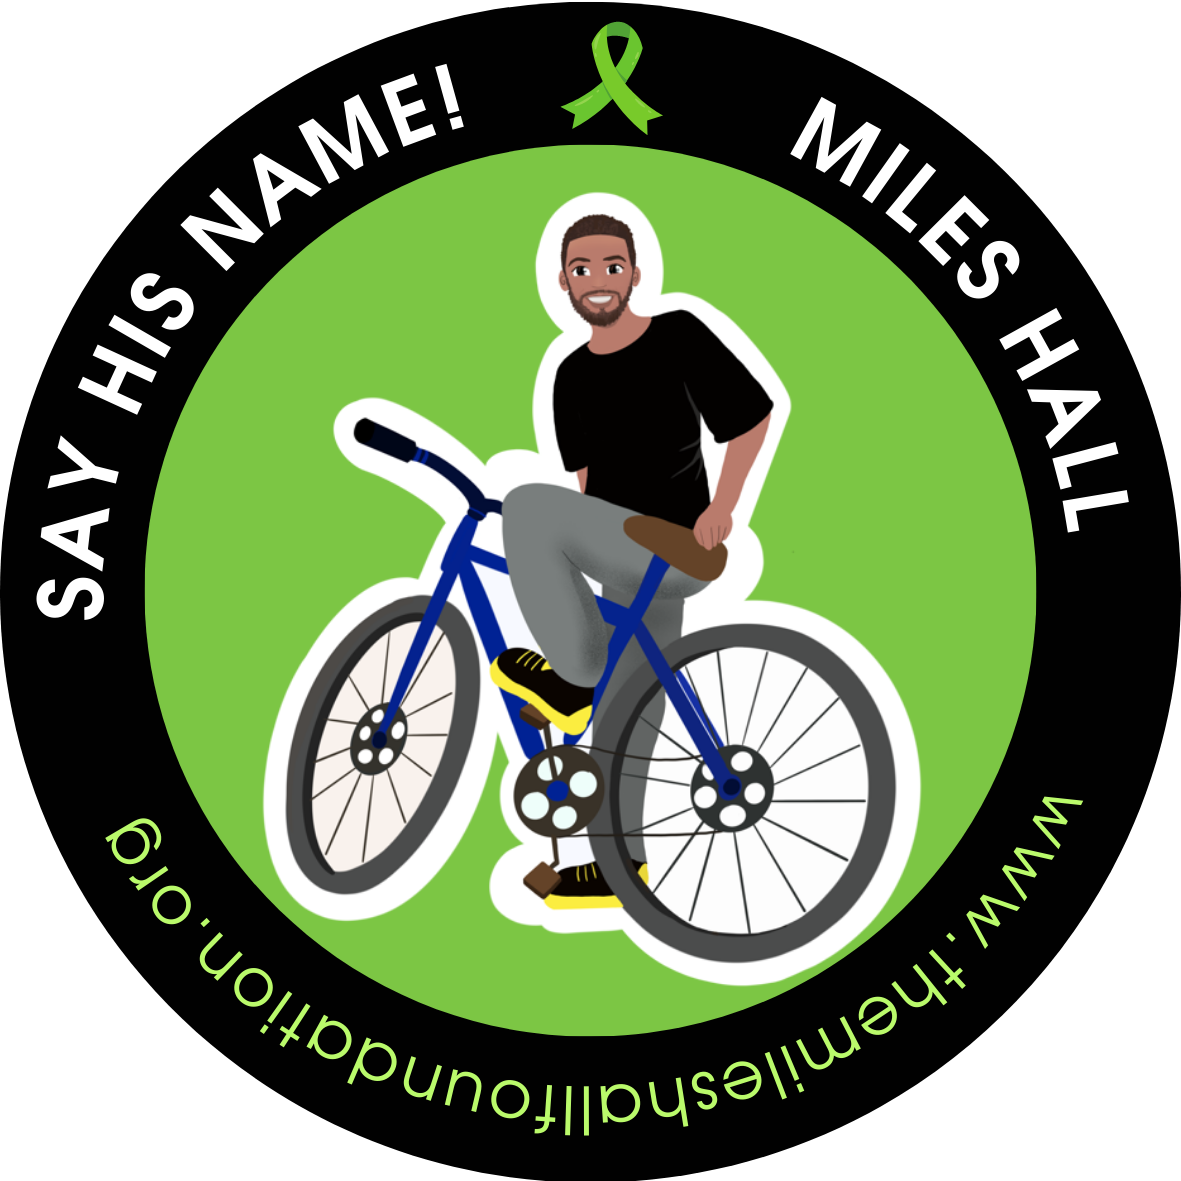 Black Say His Name "Miles Hall" 3-inch sticker.